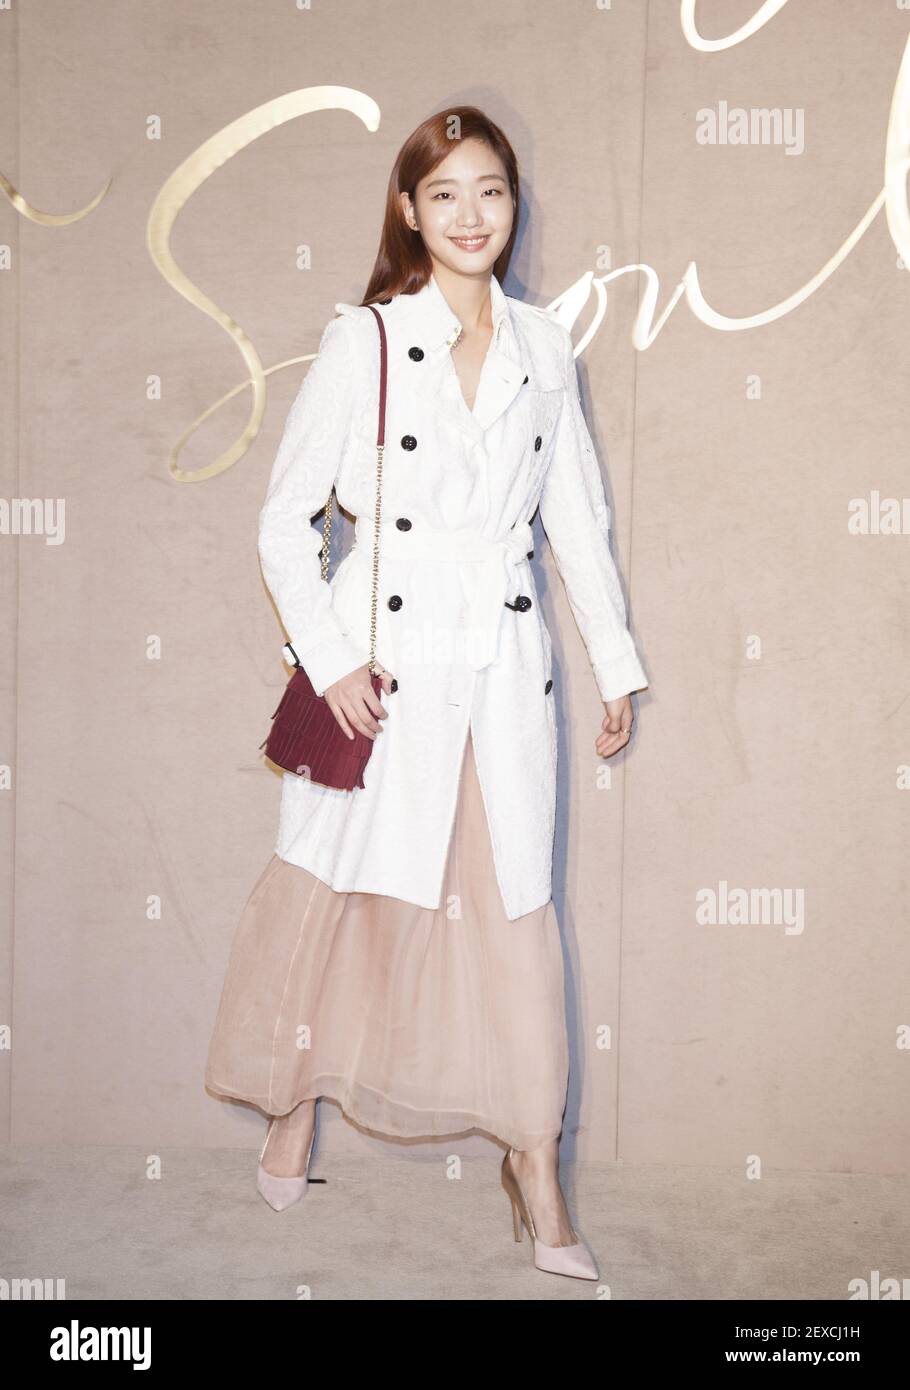 15 October 2015 - Seoul, South Korea : South Korean actress Kim Go-eun,  attends the photo call for British luxury fashion brand 'Burberry' flagship  store opening ceremony in Seoul, South Korea on